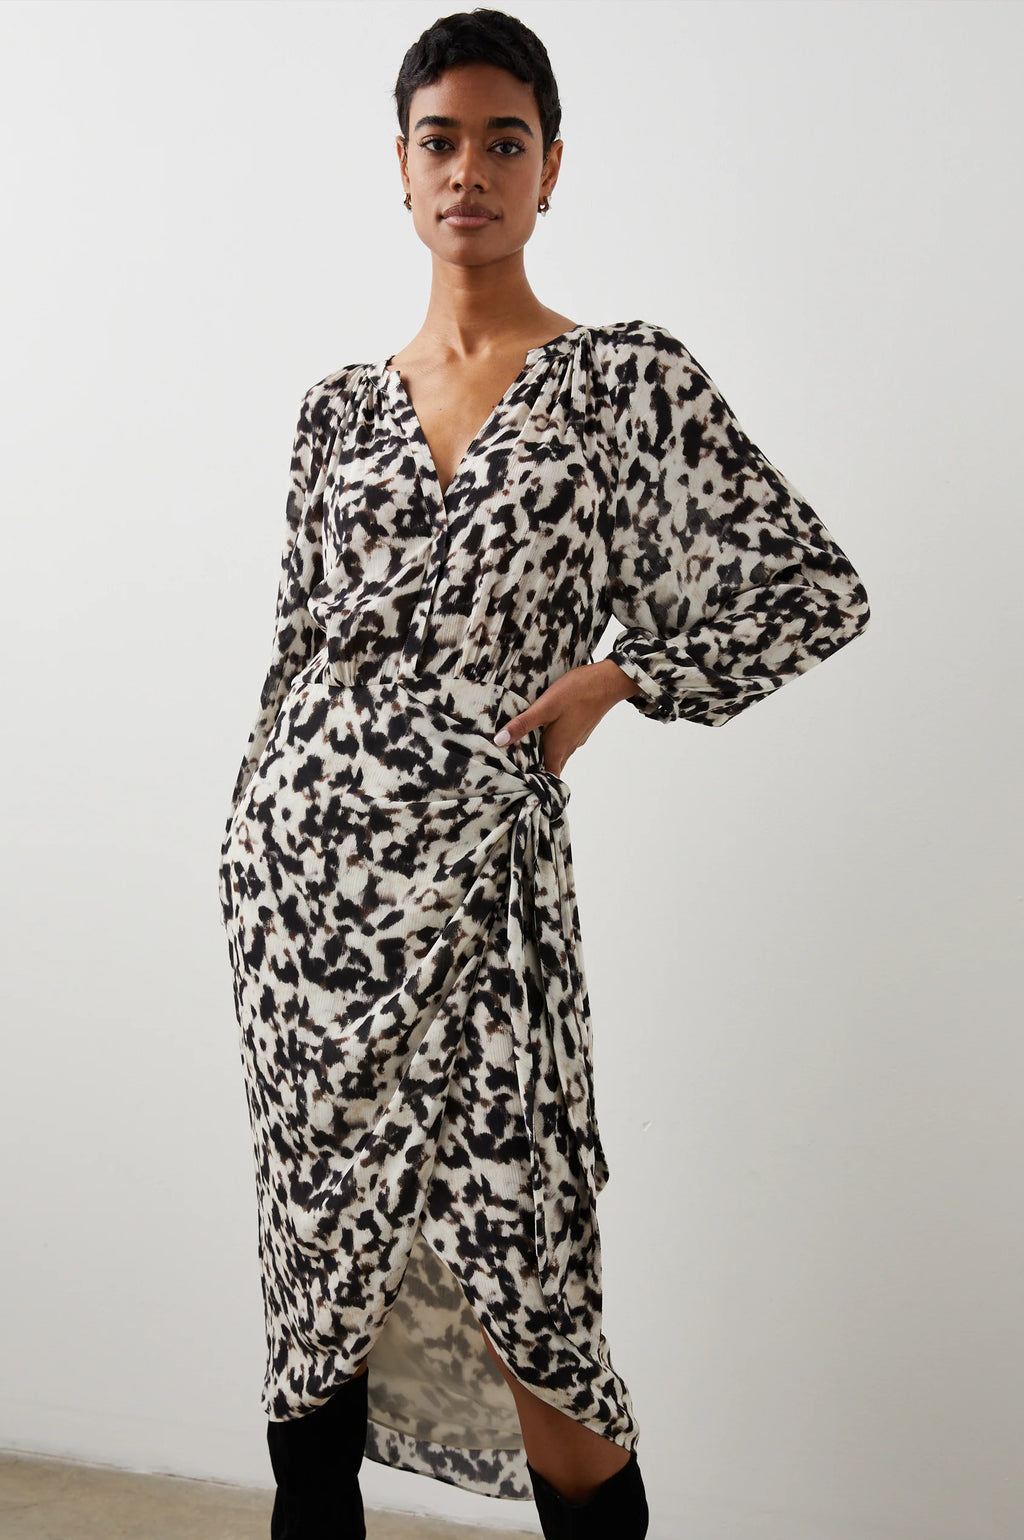 For the moments you want to look and feel your best, opt for the Tyra. Made from rayon chiffon in a neutral-colored yet bold animal print, this flowy long sleeve dress is ready to be dressed up or down for any occasion. 100% Rayon.